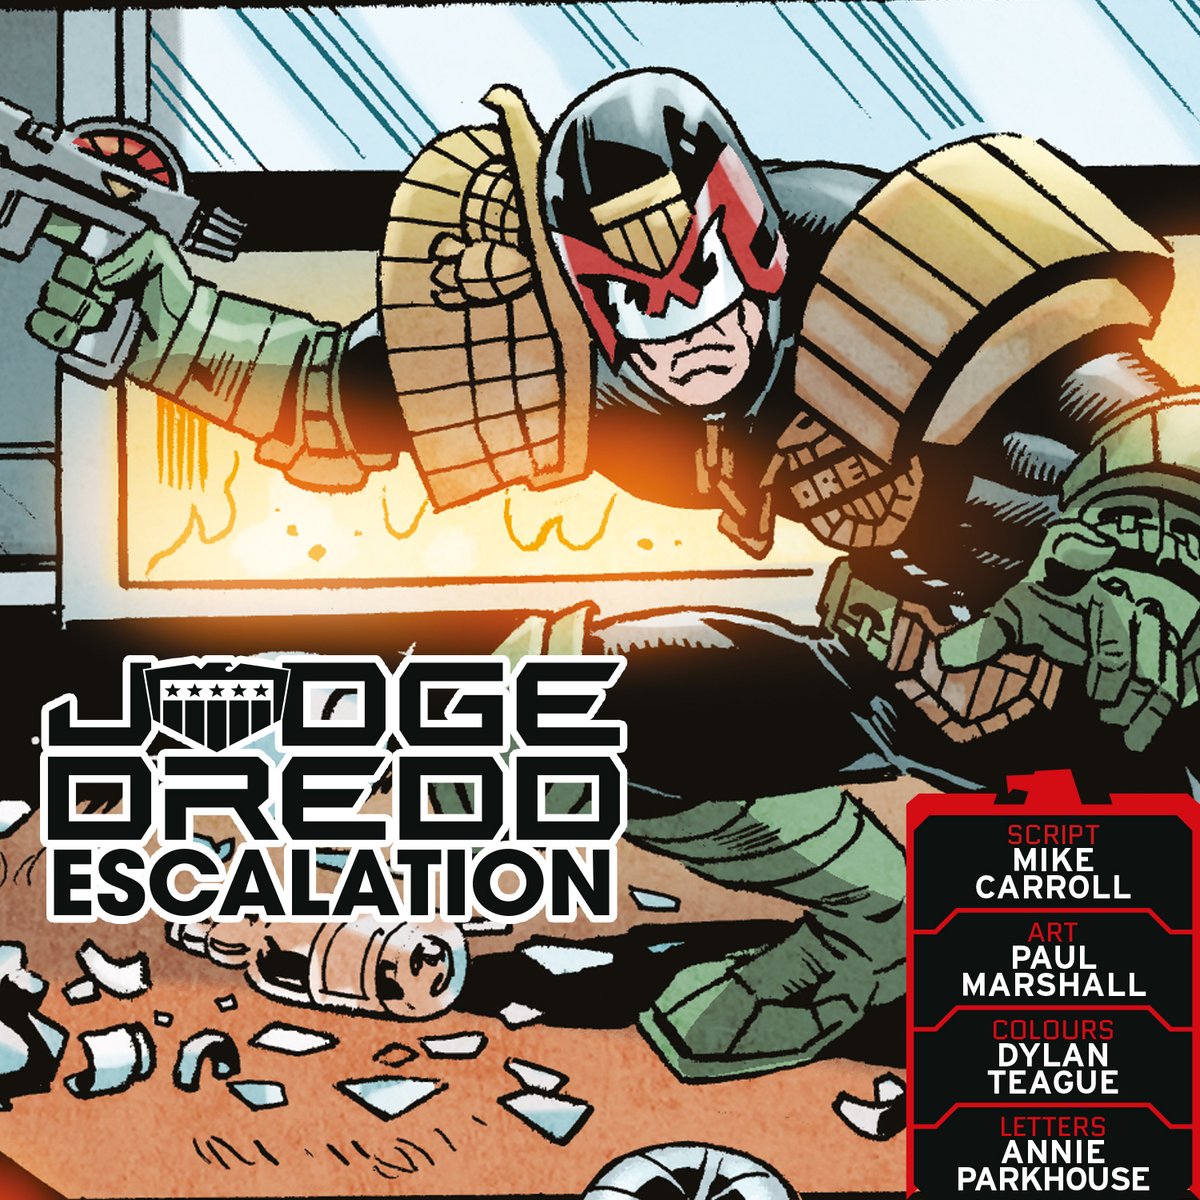 Judge Dredd Megazine 467 is out on 17th April, featuring JUDGE DREDD: ESCALATION by: 📝 Script: @MikeOwenCarroll ✏️ Art: Paul Marshall 🎨 Colours: @DylanTeague 💬 Letters: Annie Parkhouse Subscribe now ➡️ bit.ly/2Ws04uc